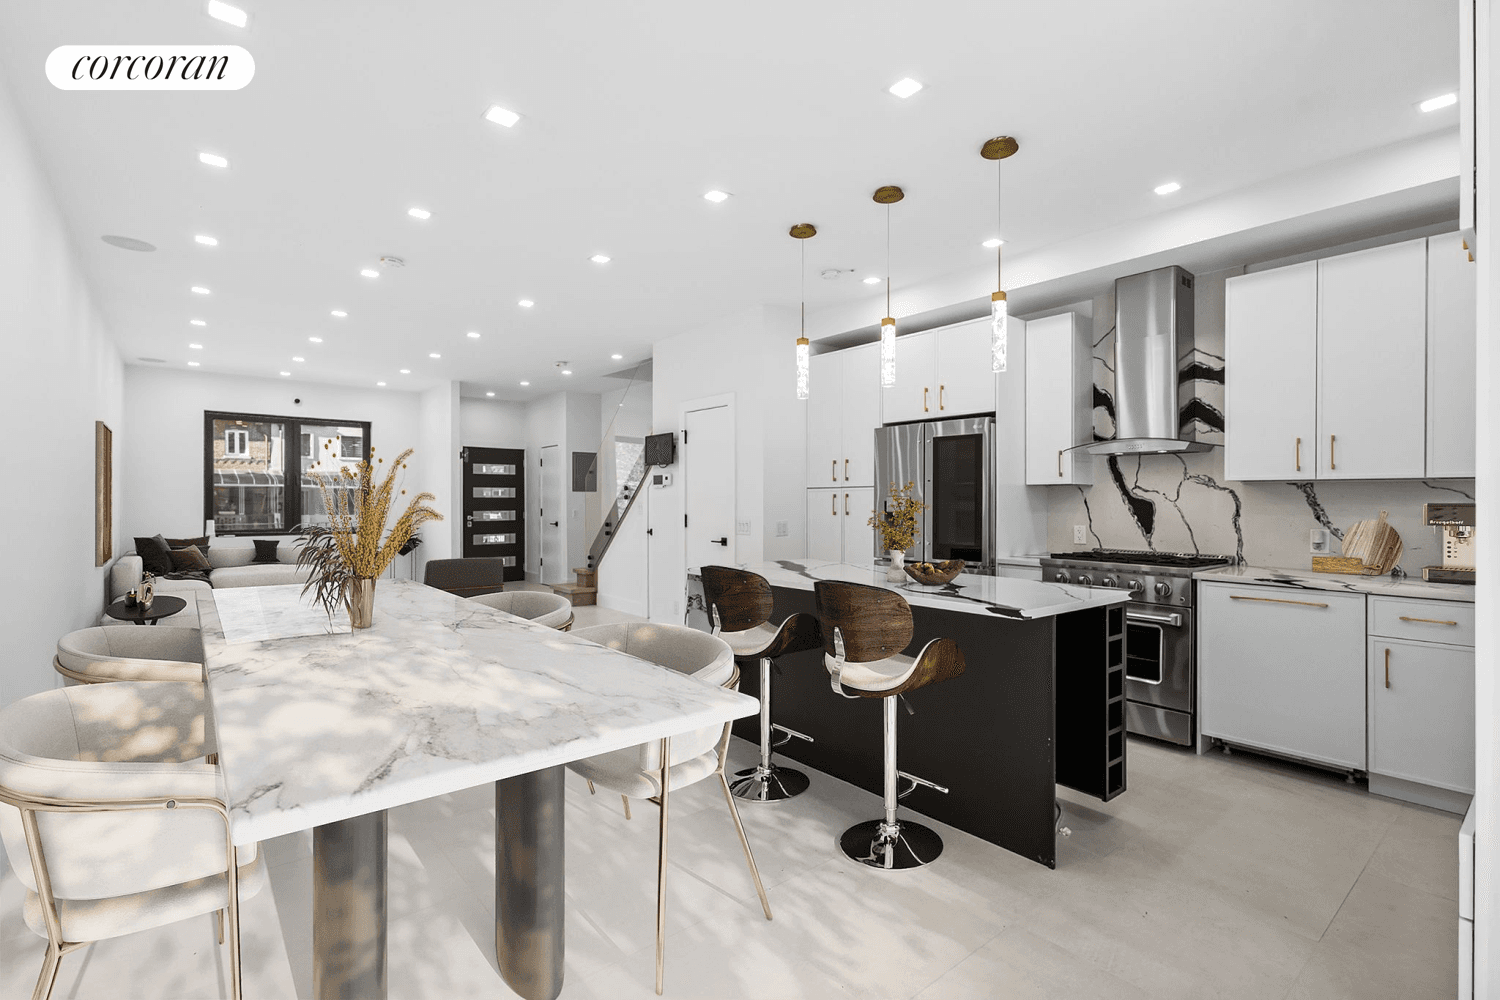 Introducing 125 Corbin Place an impeccably modern and renovated townhome that boasts a sleek design, a convenient driveway garage combo, and a private backyard retreat !